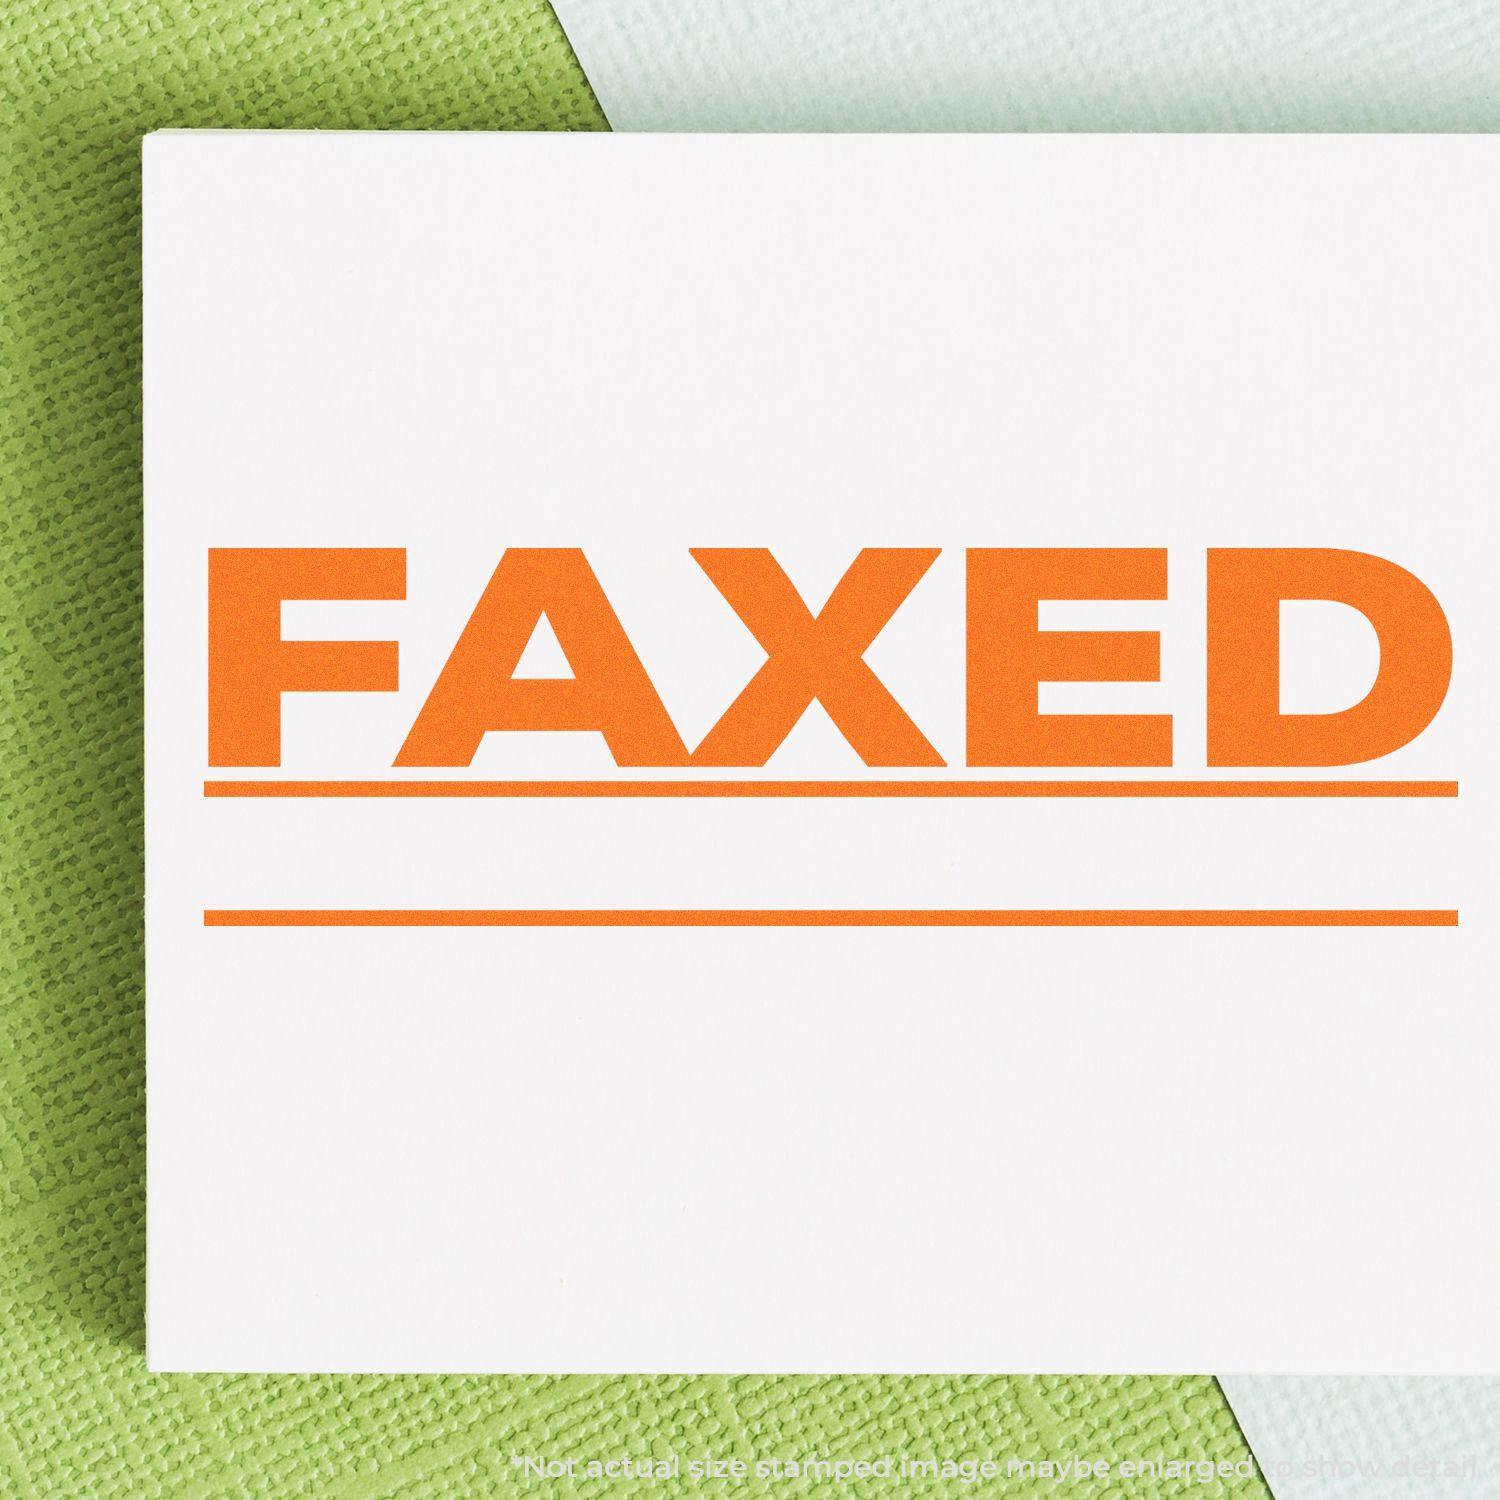 A self-inking stamp with a stamped image showing how the text "FAXED" with two lines below the text is displayed after stamping.